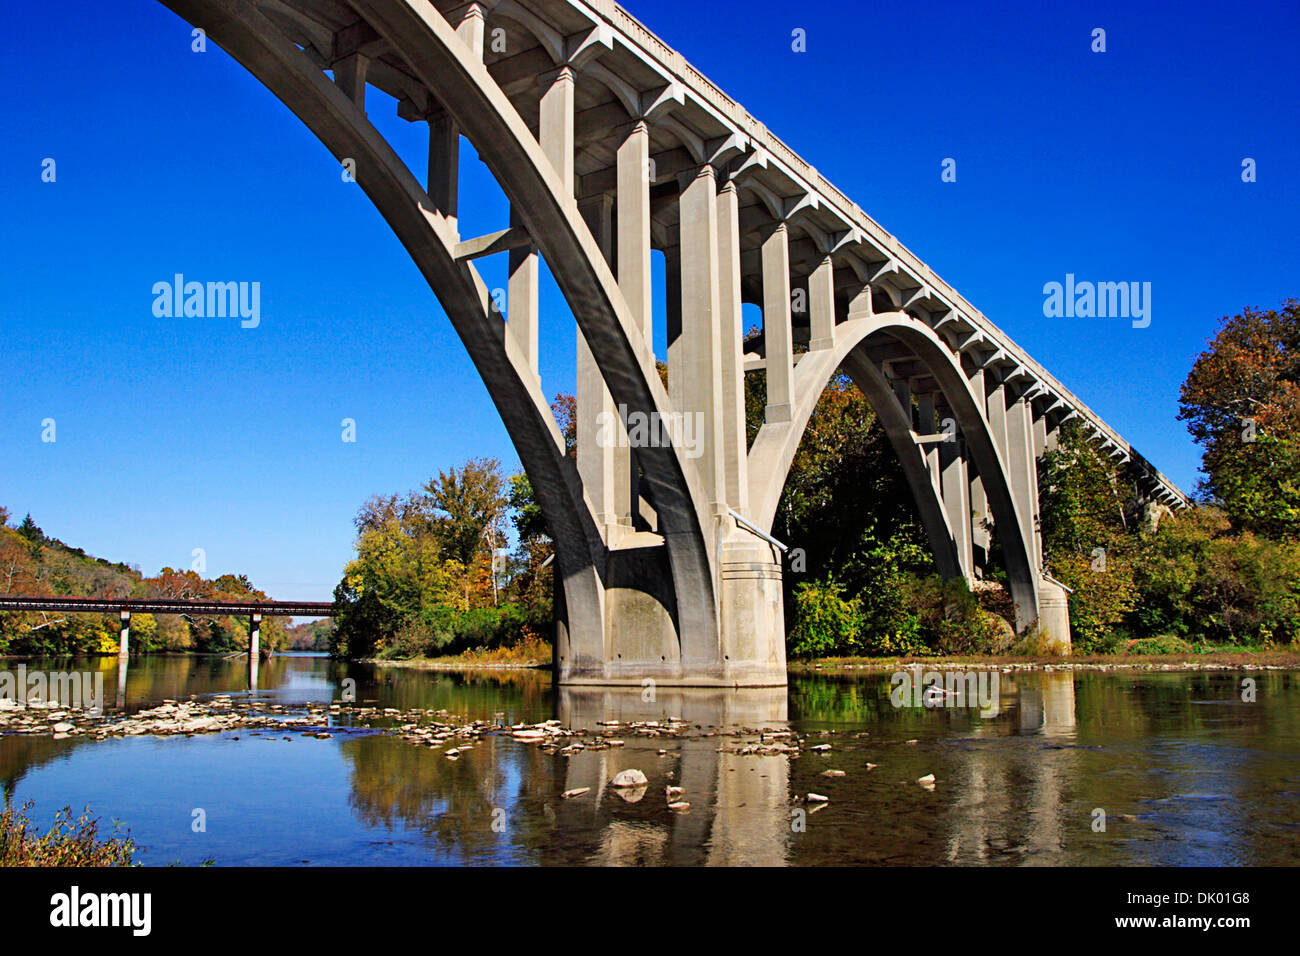 A Picturesque Roadway Bridge Over The Little Miami River On An Early Autumn Morning, Little Miami State Park, Ohio, USA Stock Photo